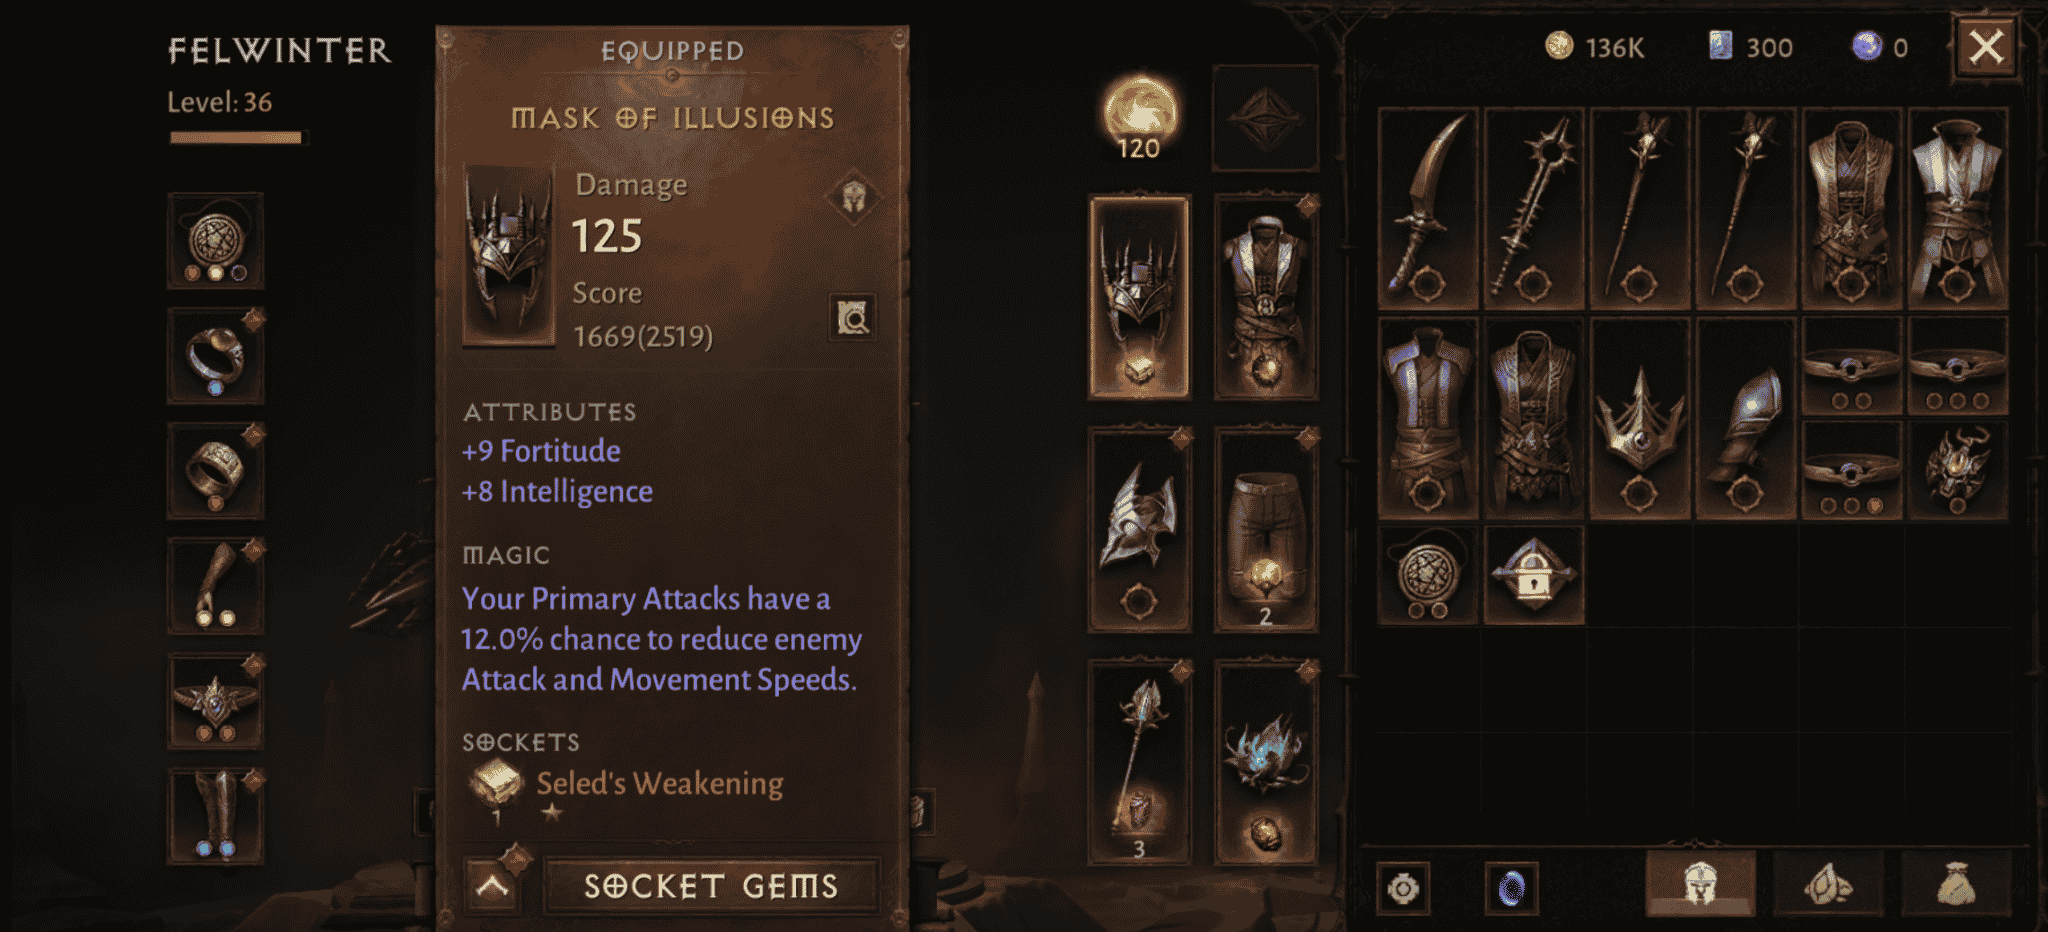 Legendary item in the inventory 